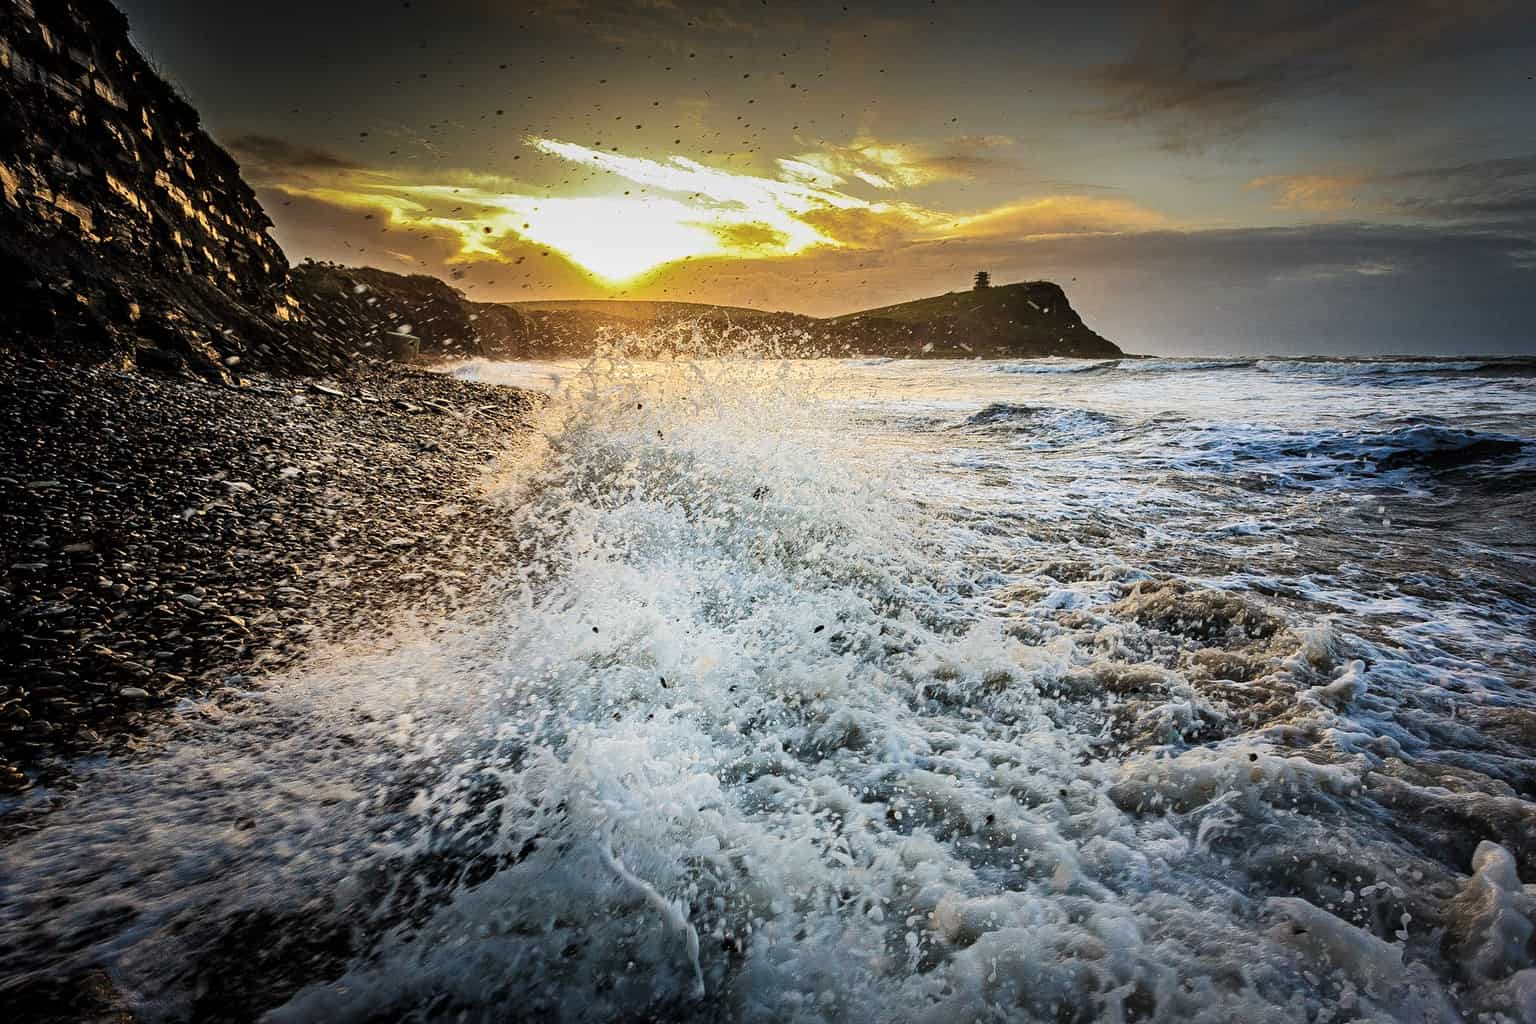  The picture of Kimmeridge Bay at sunrise with the crashing wave 